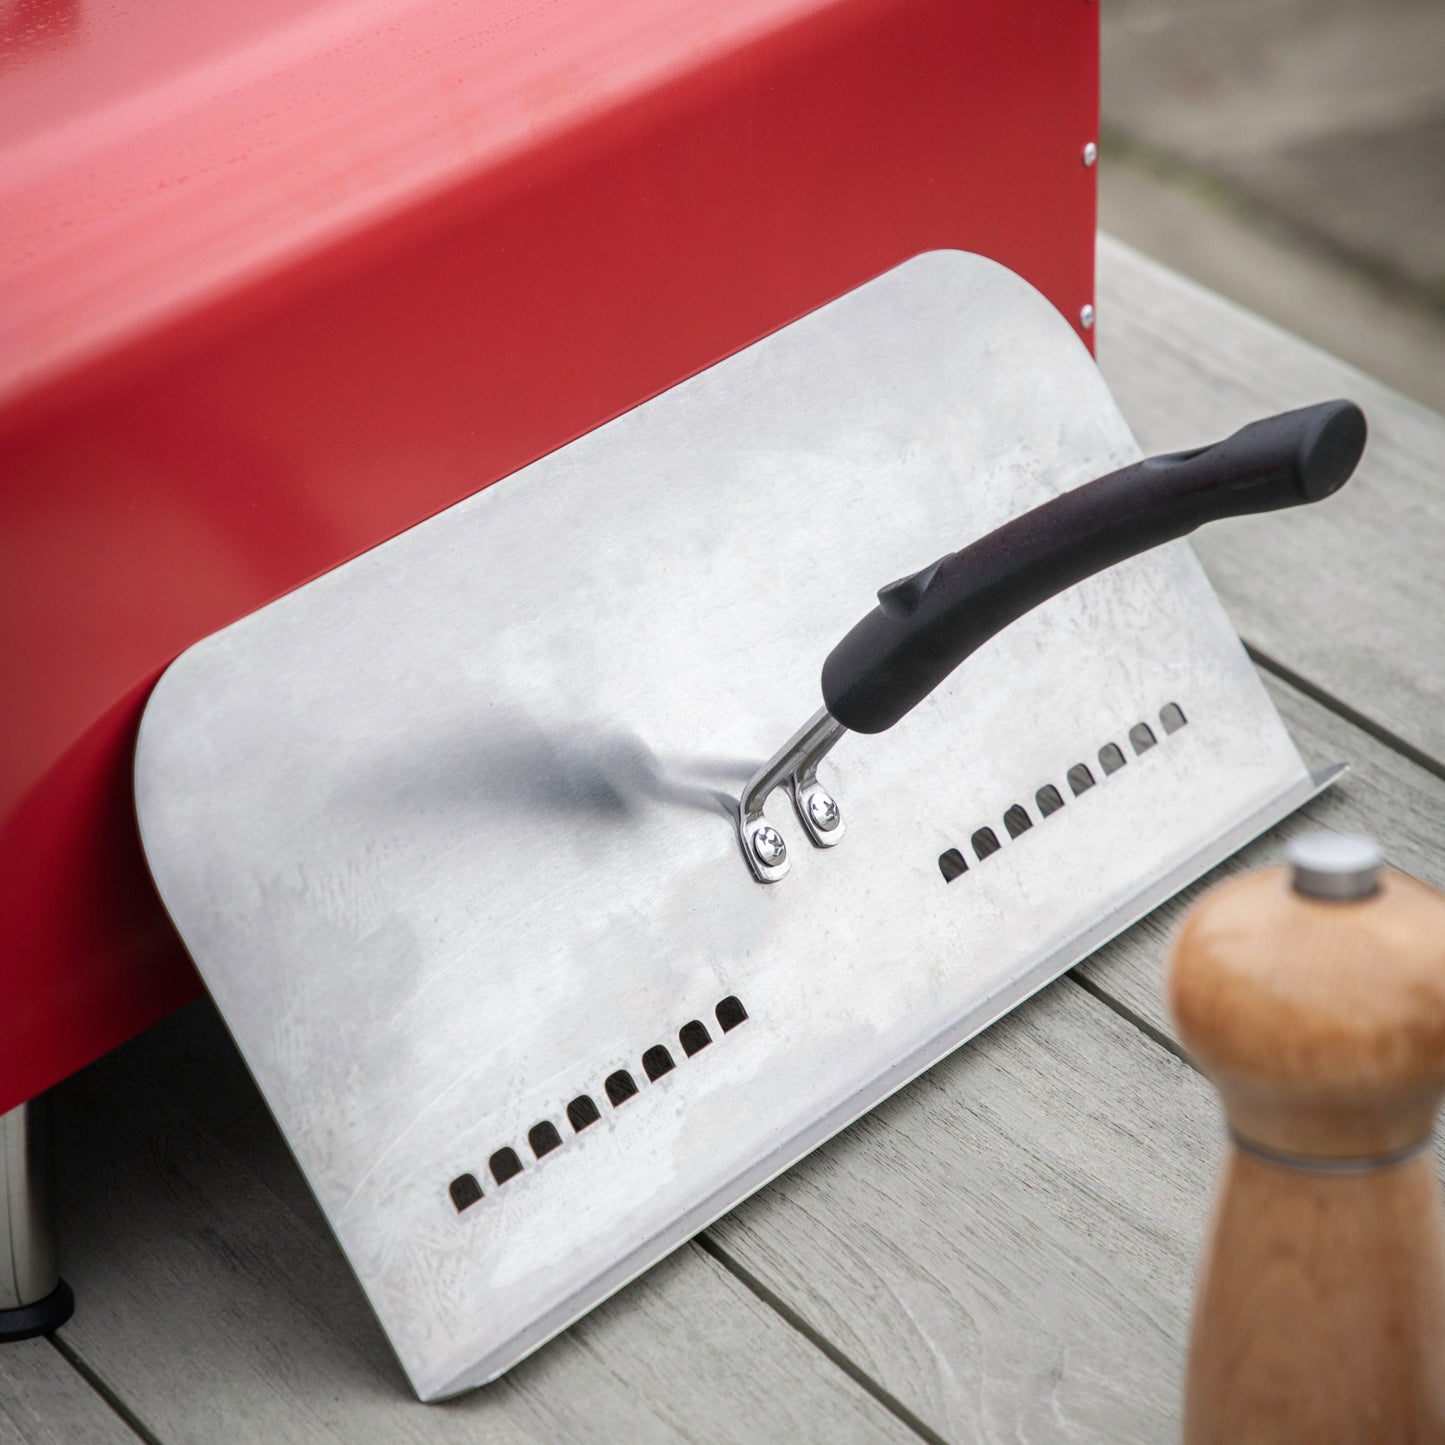 A Brixham Pellet Pizza Oven Red with a spatula attached, ideal for home furniture and interior decor.